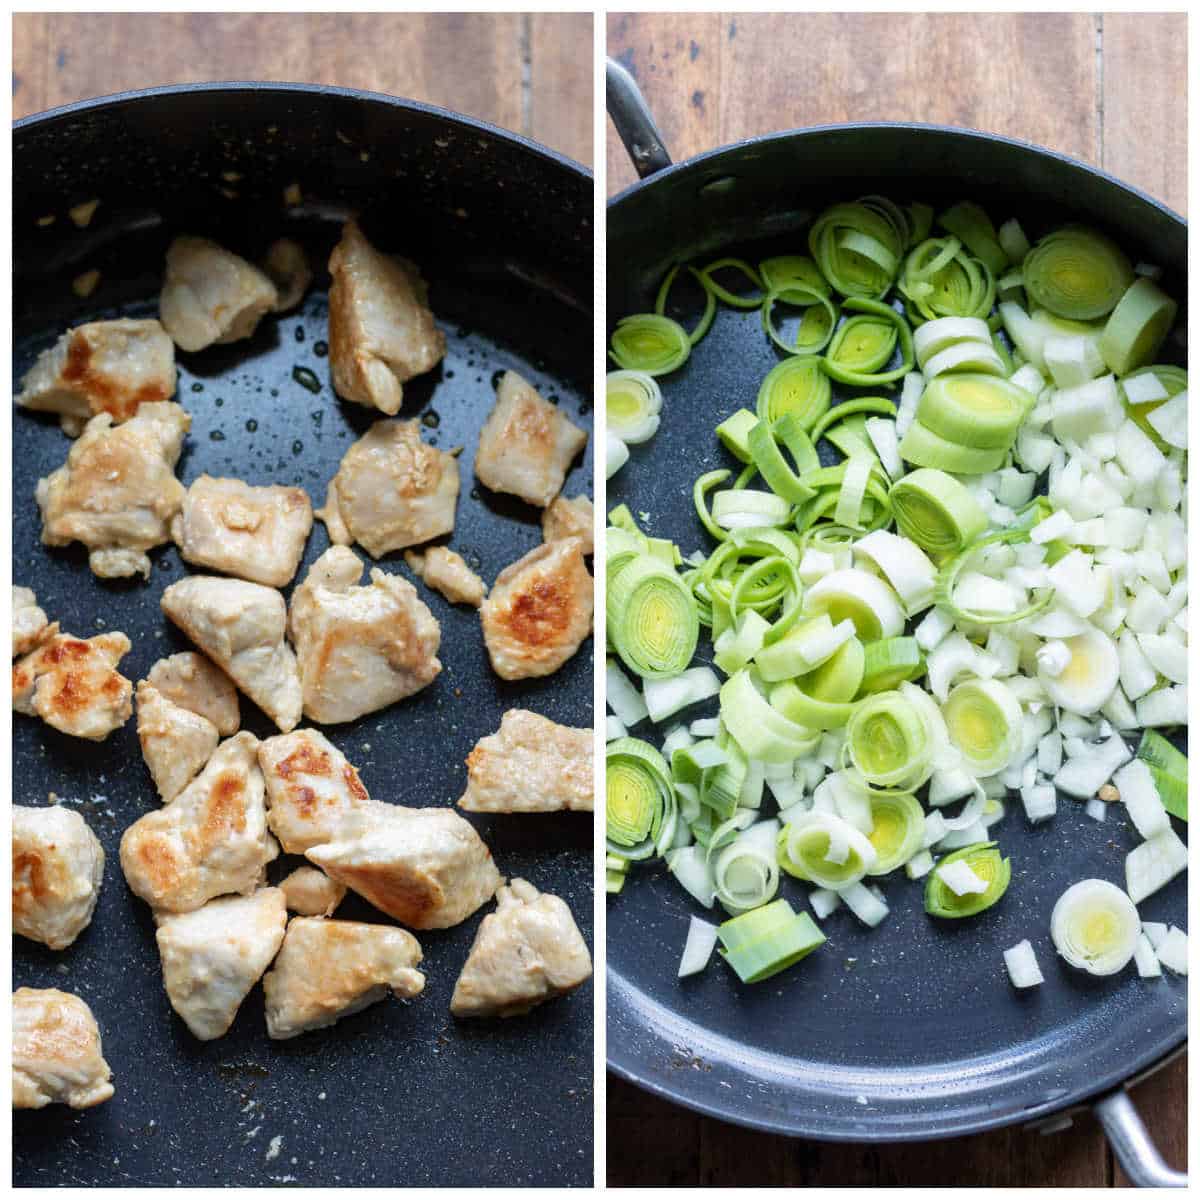 Pan with cooked chicken and pan with leeks and onions.